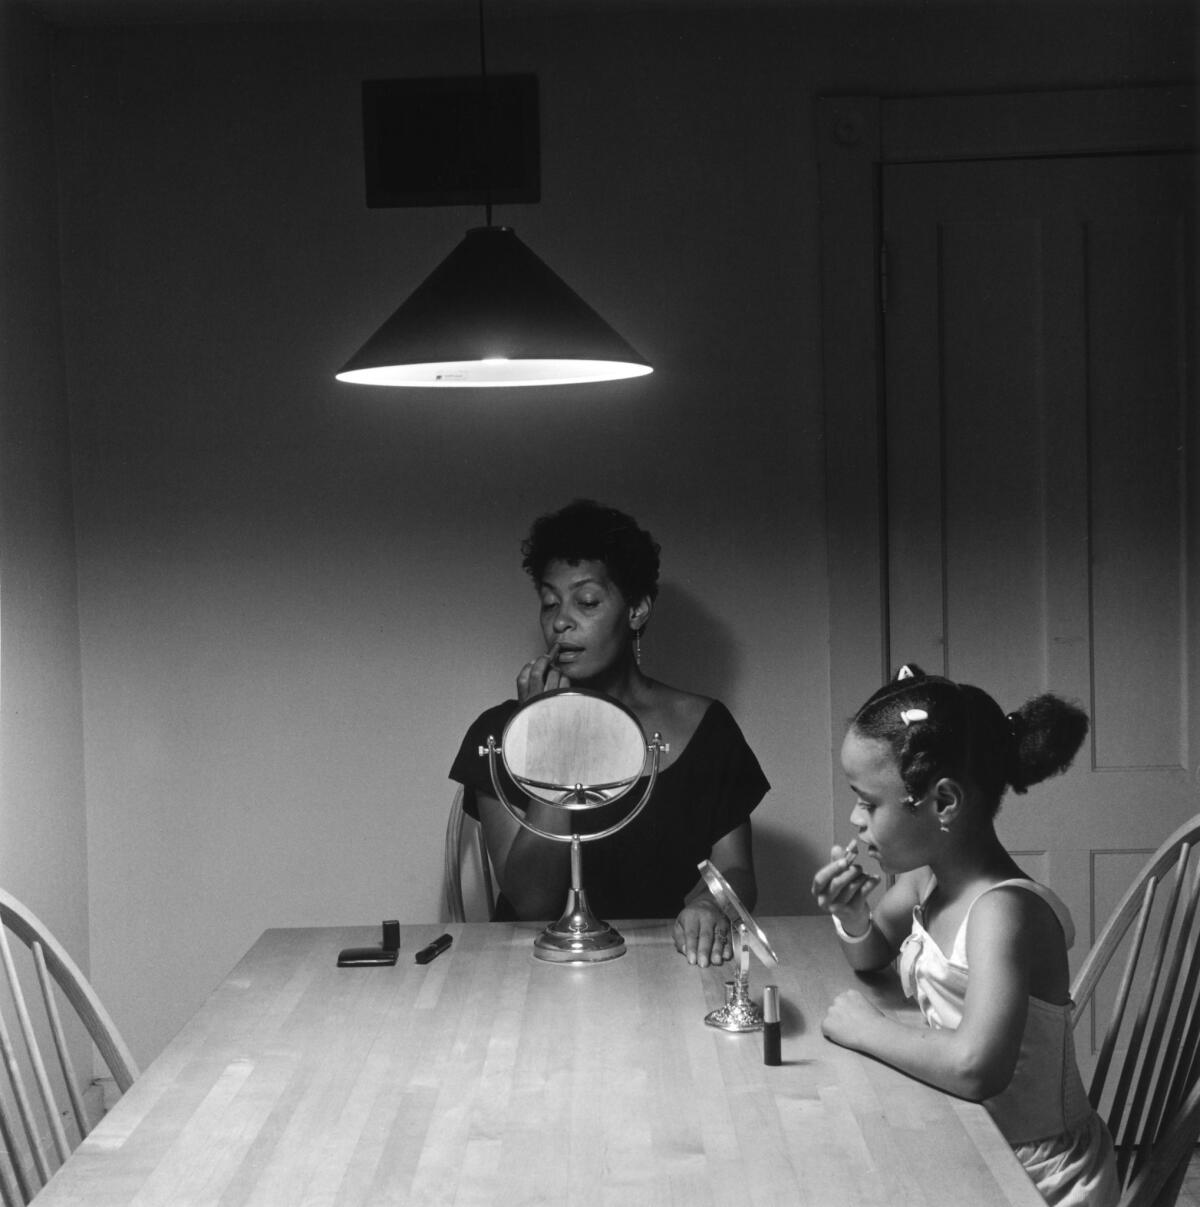 Carrie Mae Weems' Untitled (Woman and daughter with makeup), from Kitchen Table Series, 1990 (Copyright Carrie Mae Weems. Courtesy of the artist and Jack Shainman Gallery, New York)